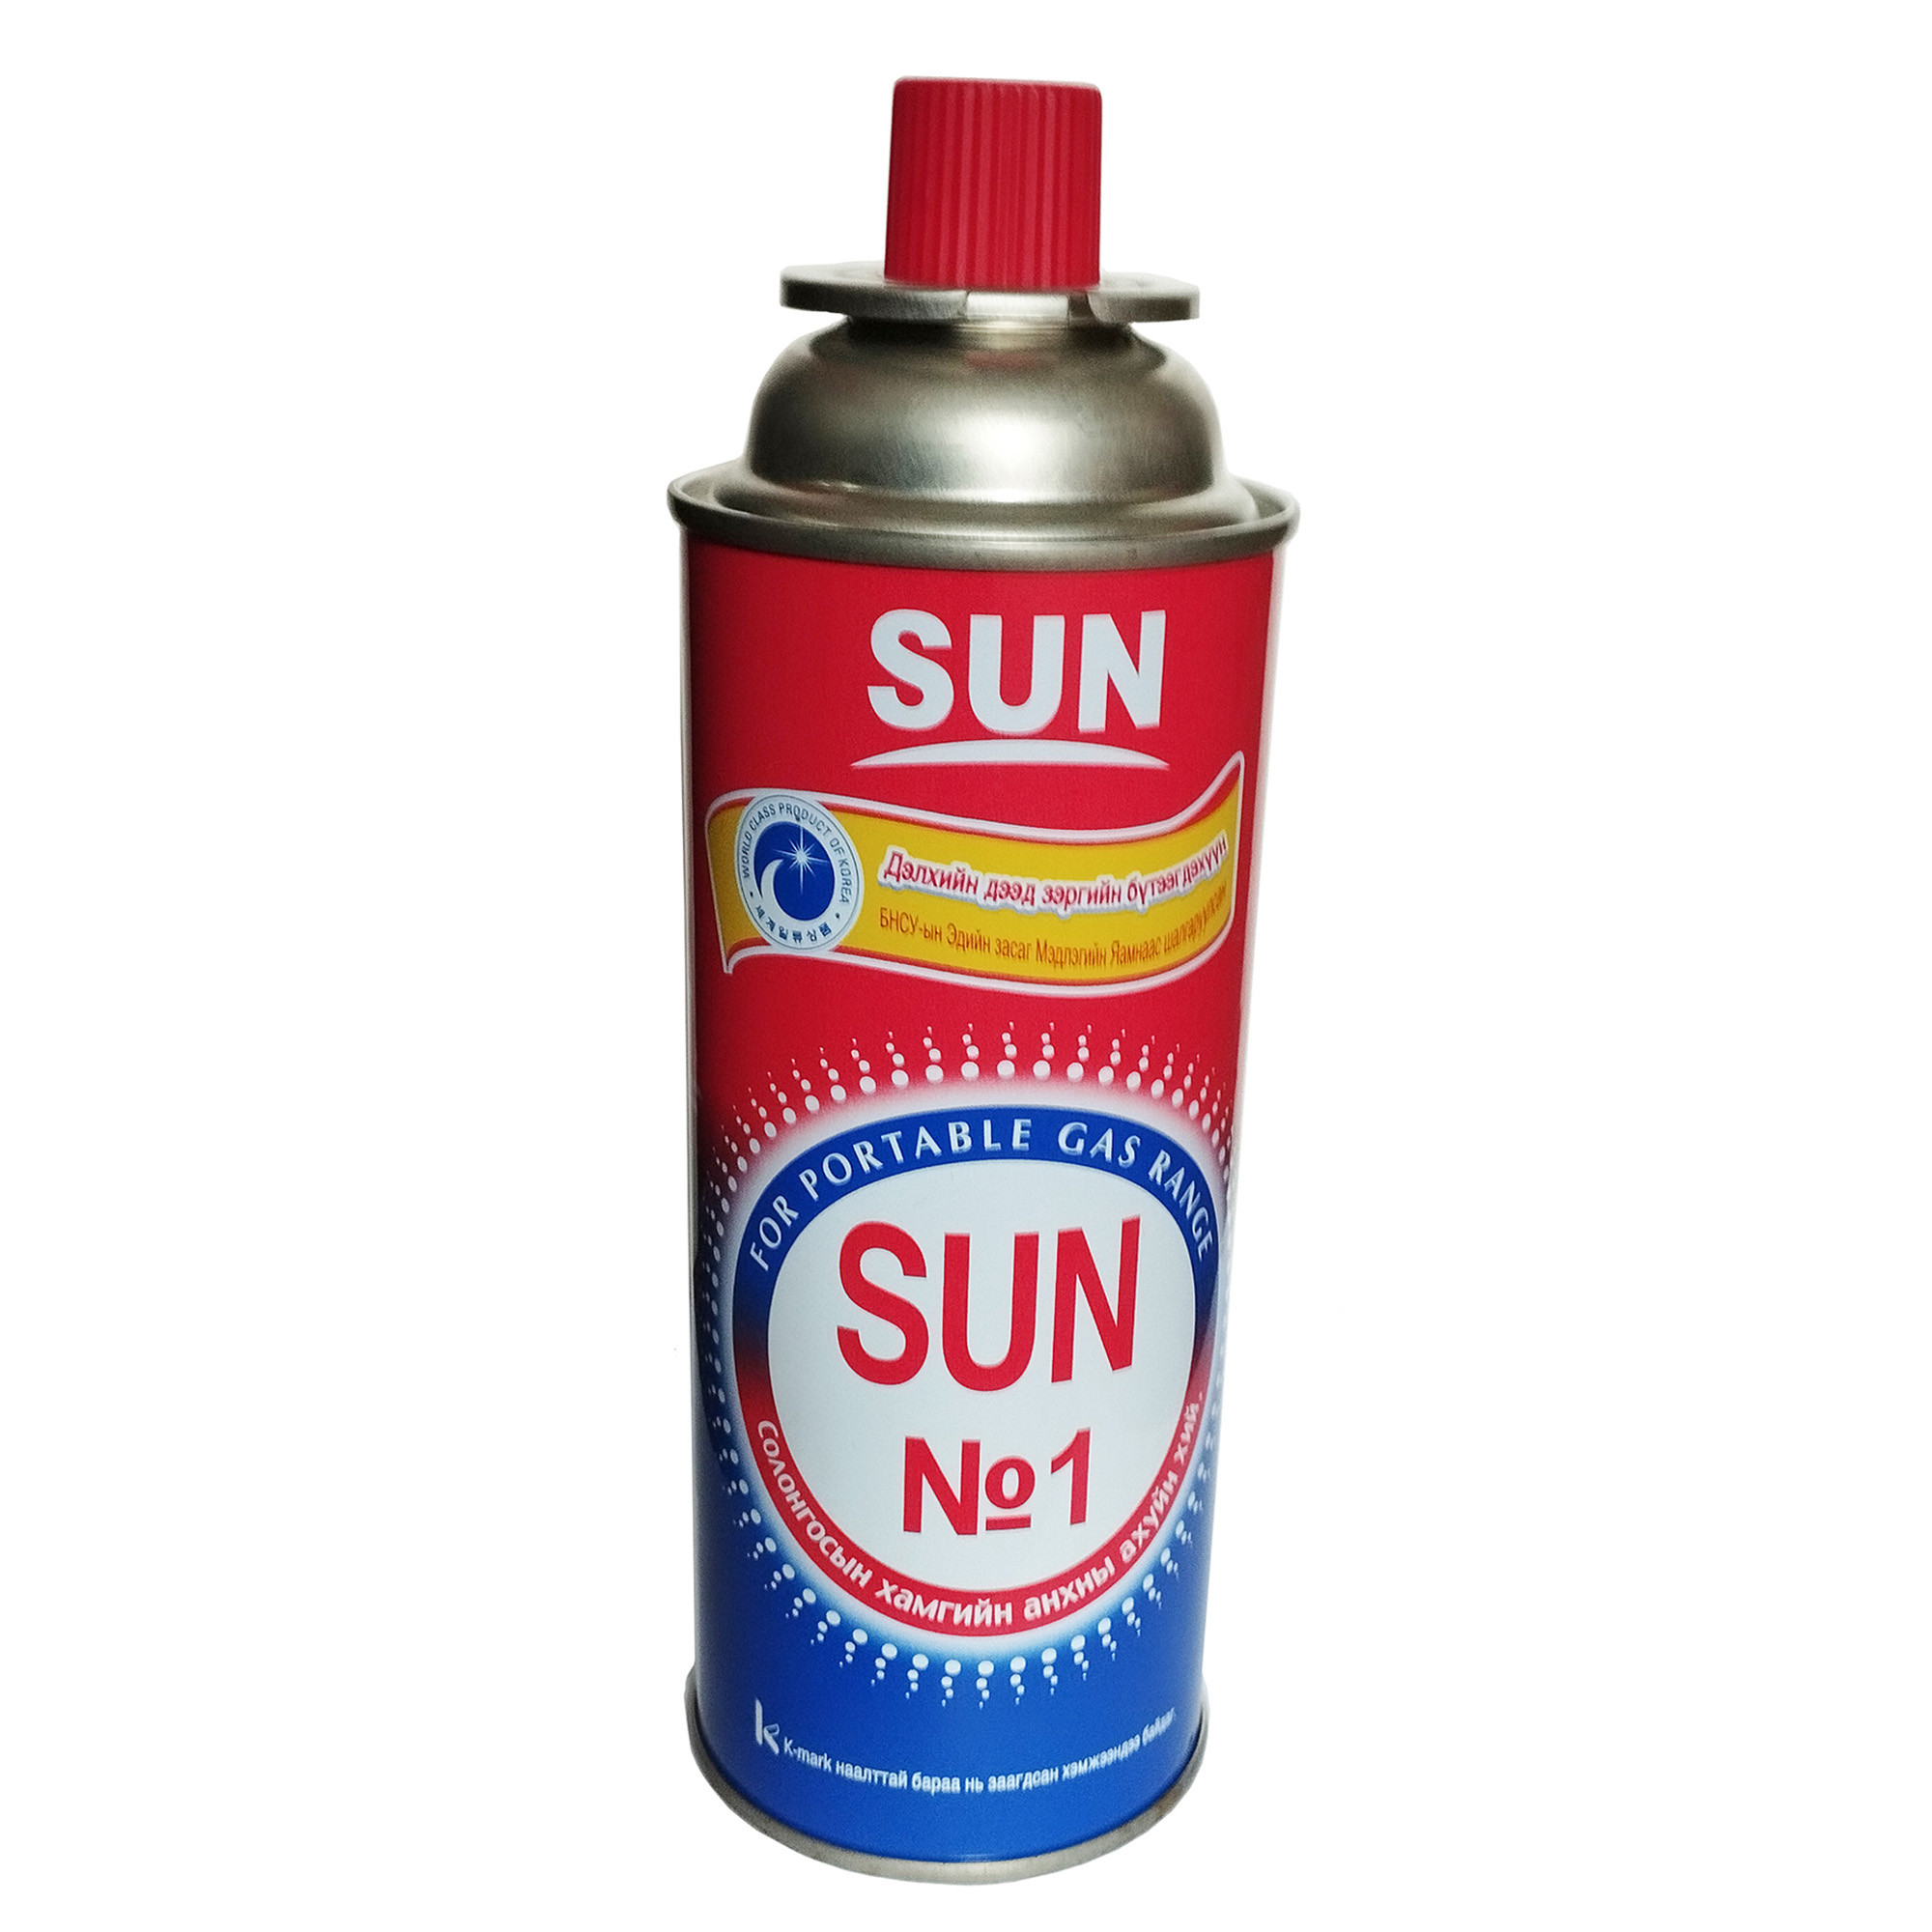 SUN Butane Fuel Gas Canister Cartridge For Portable Stove